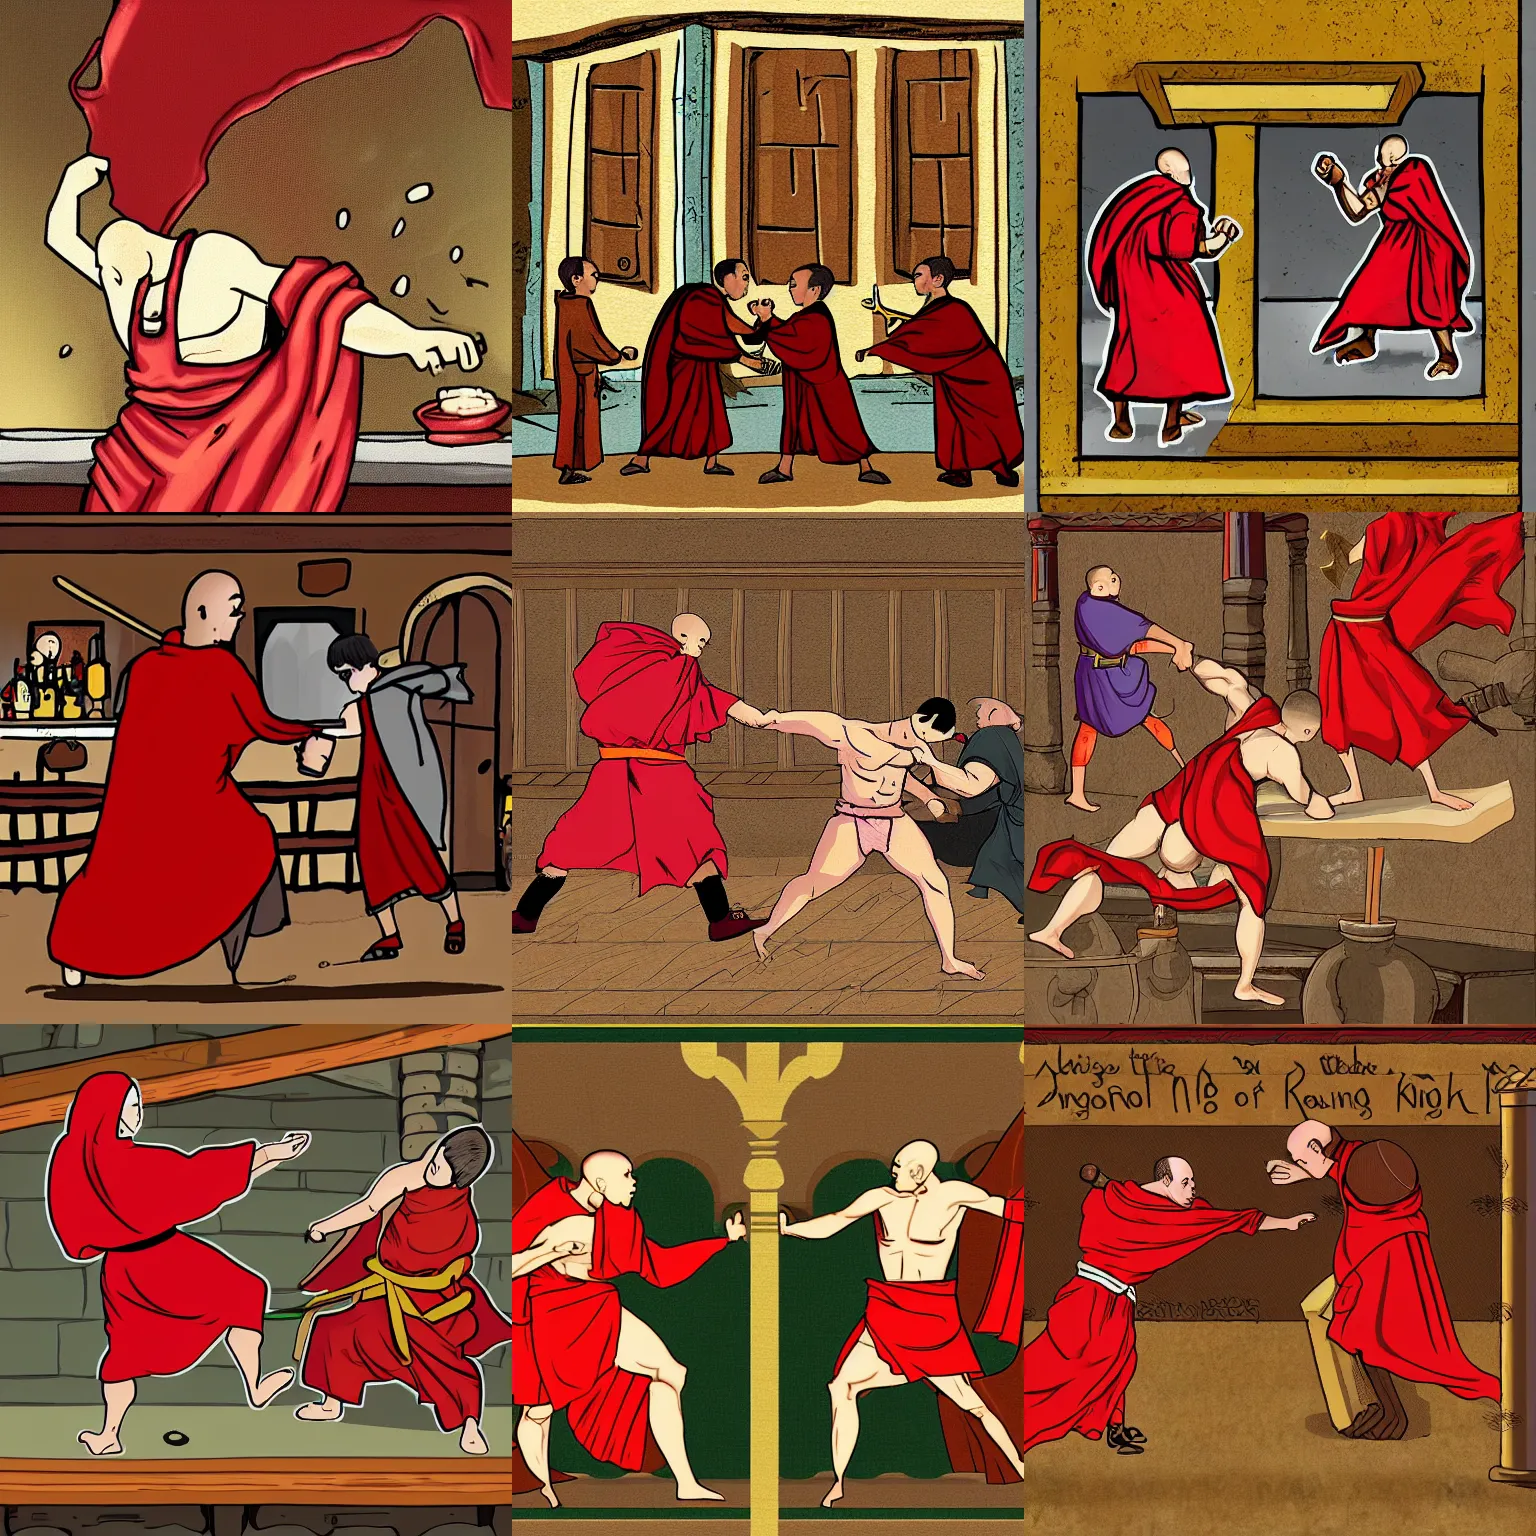 Prompt: A small monk with a red cloak punching a large knight in his stomach in the middle of a bar brawl, digital art